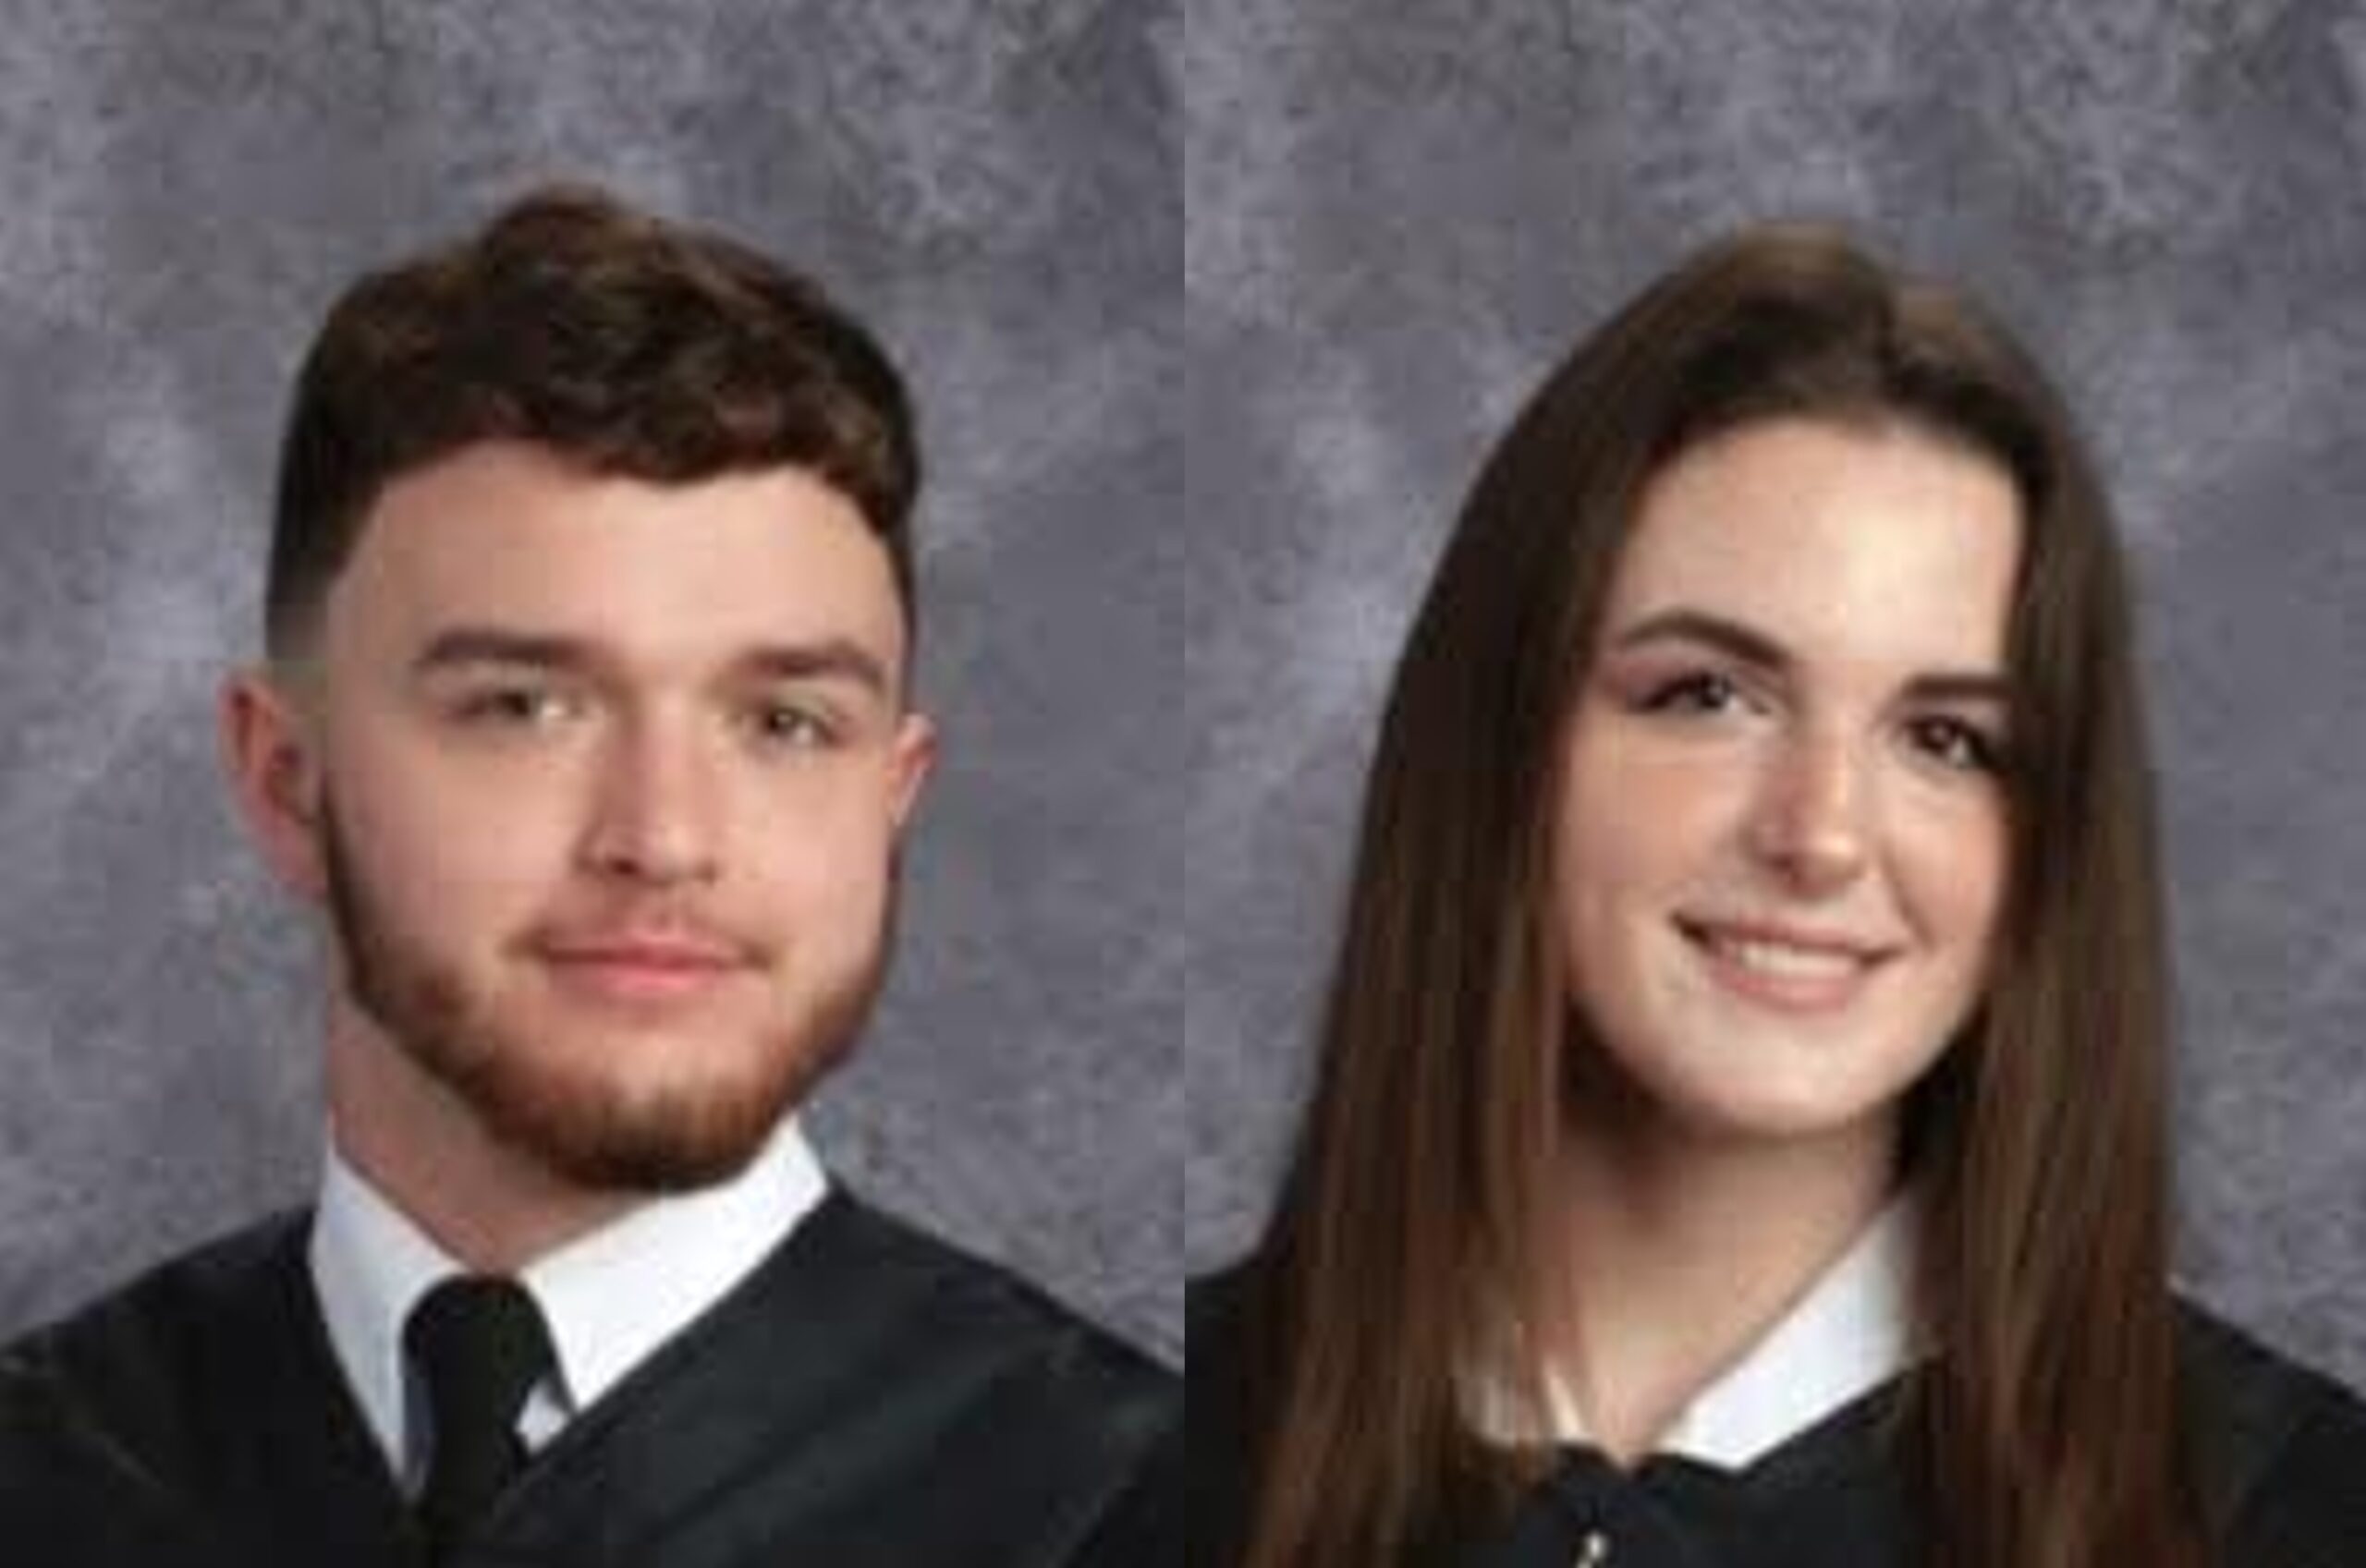 McGhee and Corker lead Hermitage Class of 2022 with highest honors